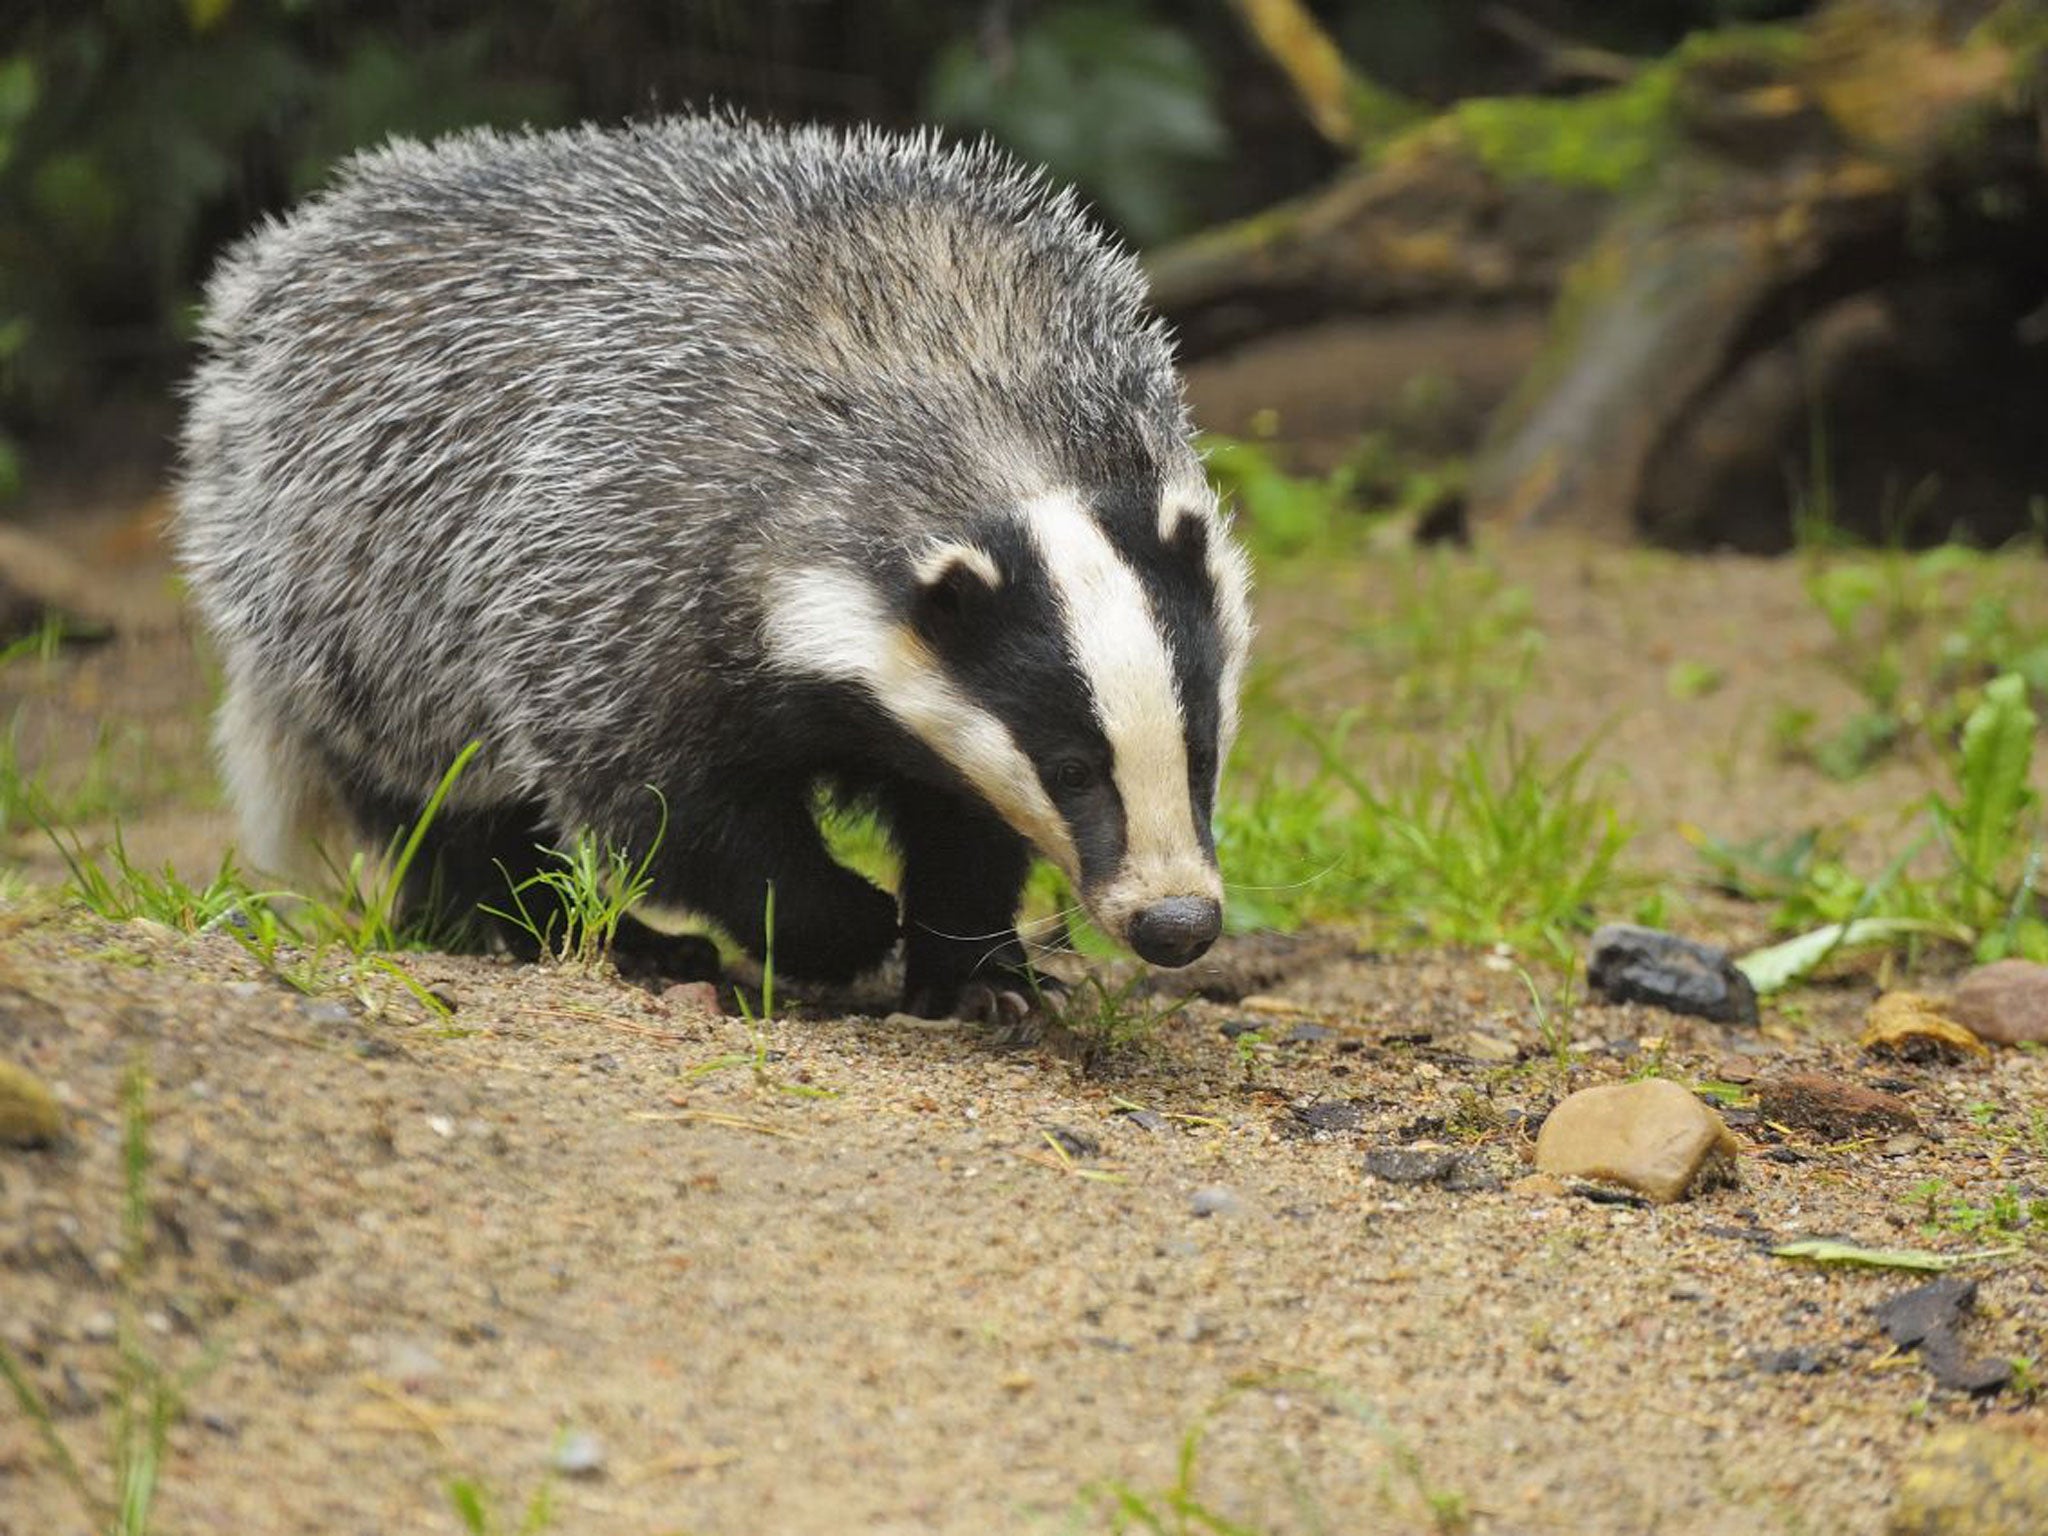 85 per cent of badgers are likely to be TB free